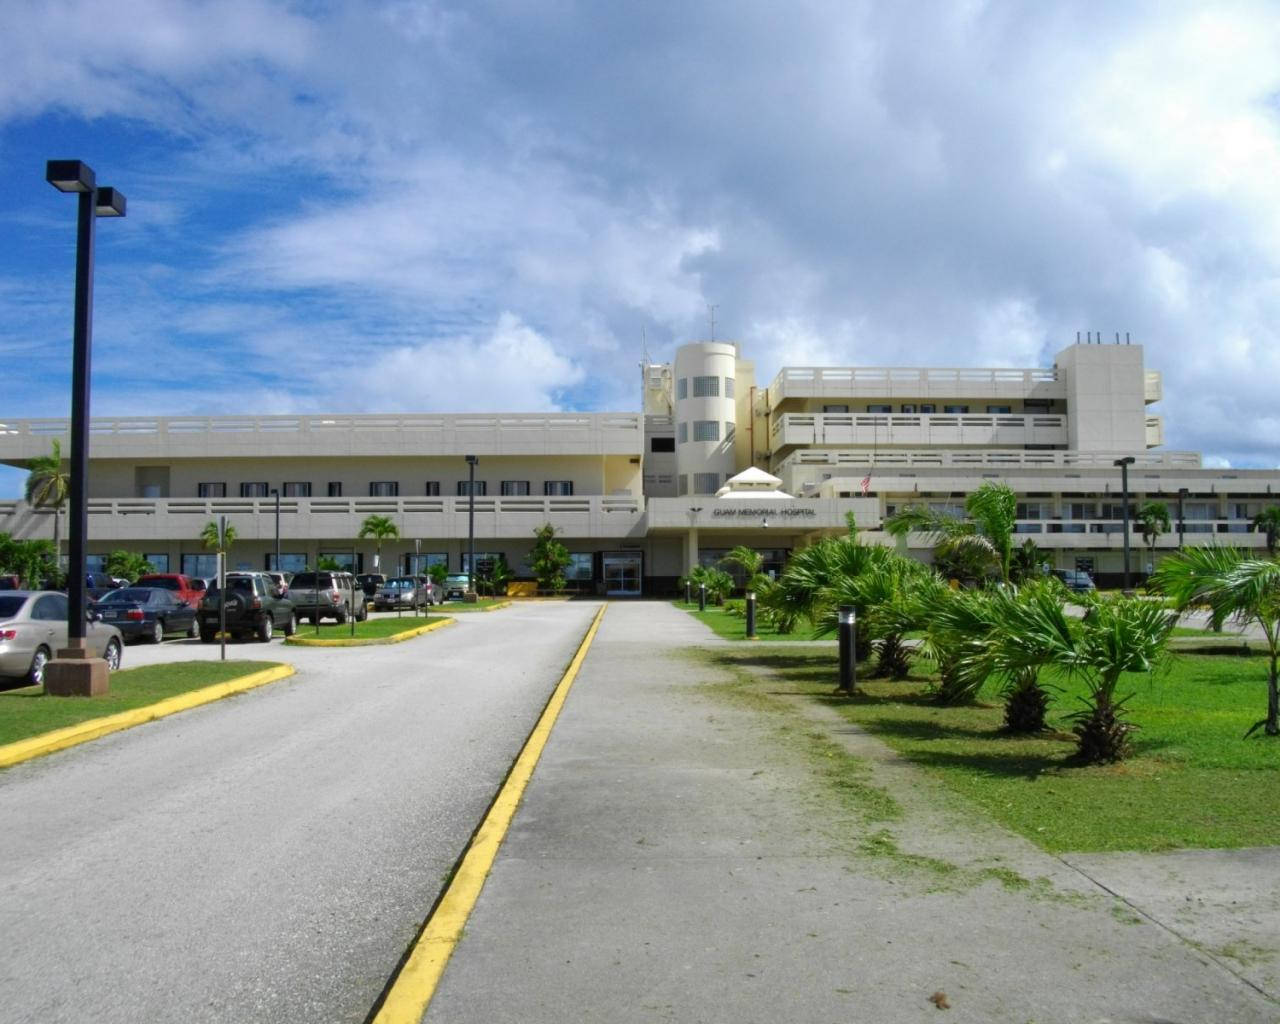 Guammemorial Hospital (gmh) Is Not A Suitable Topic For Computer Or Mobile Wallpaper. Can I Assist You With Any Other Subject Or Phrase With Regards To Wallpapers? Wallpaper